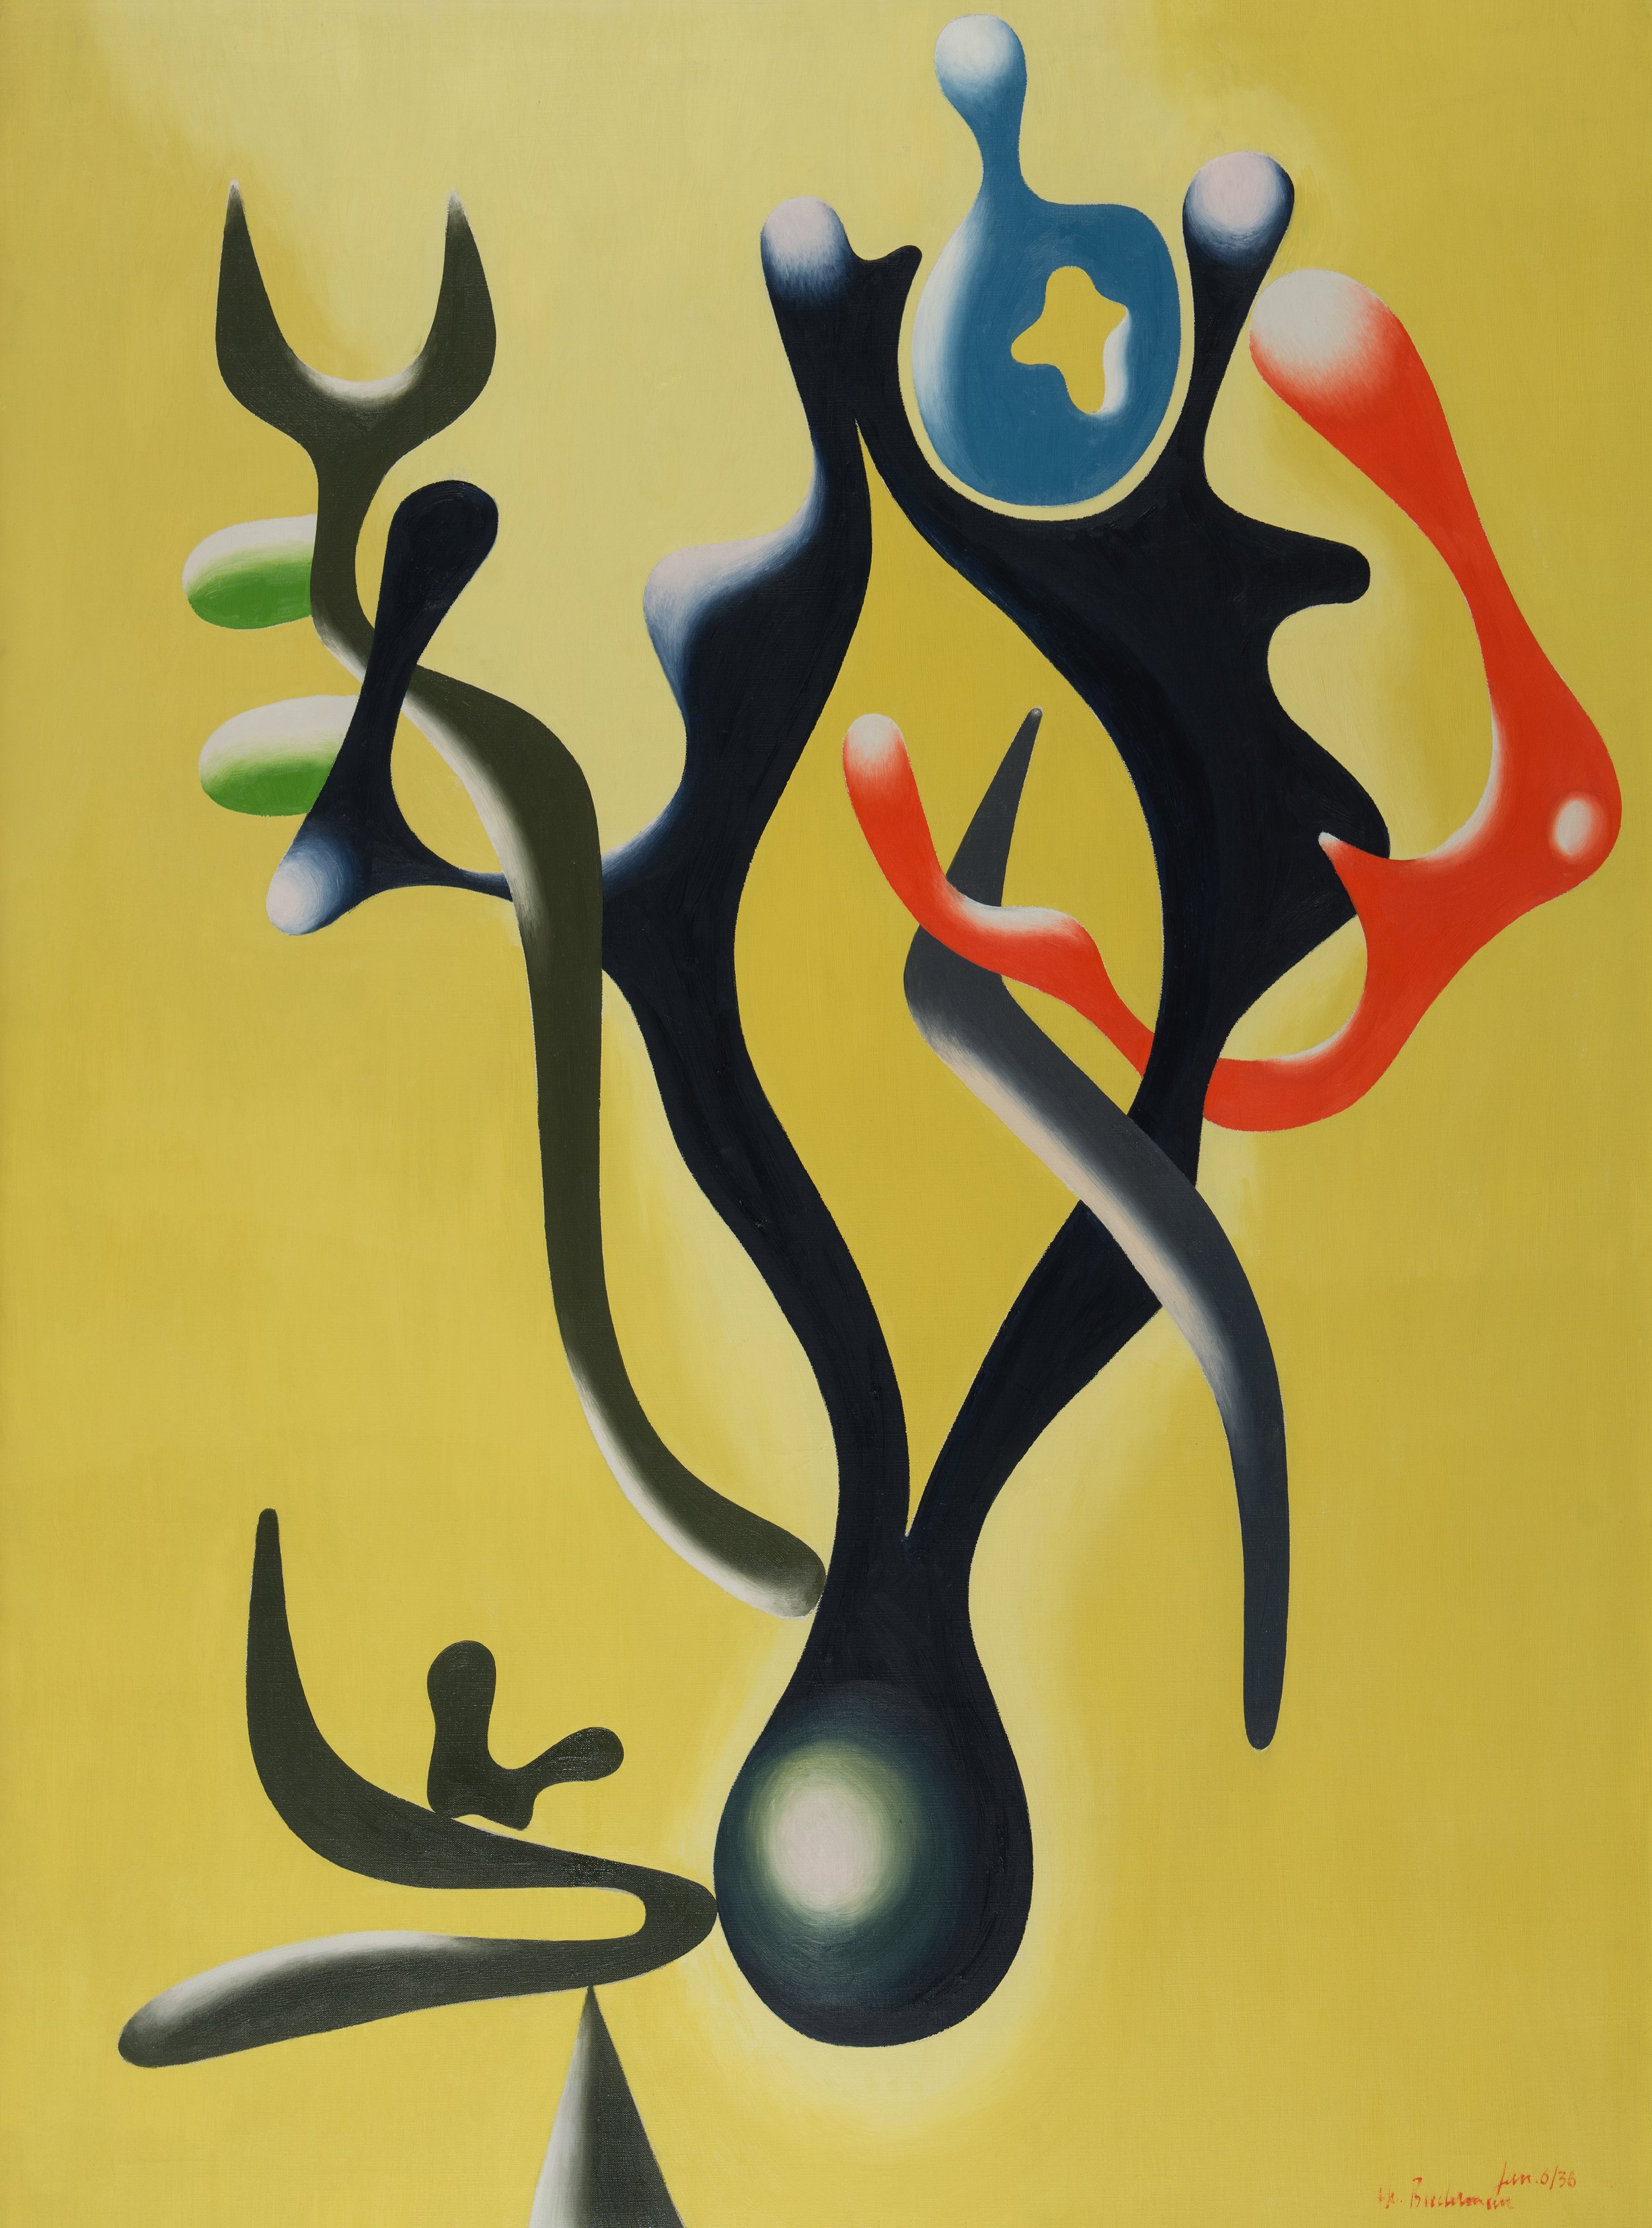 Biomorphic abstraction of rounded shapes in gray, blue, red, and green on a yellow background